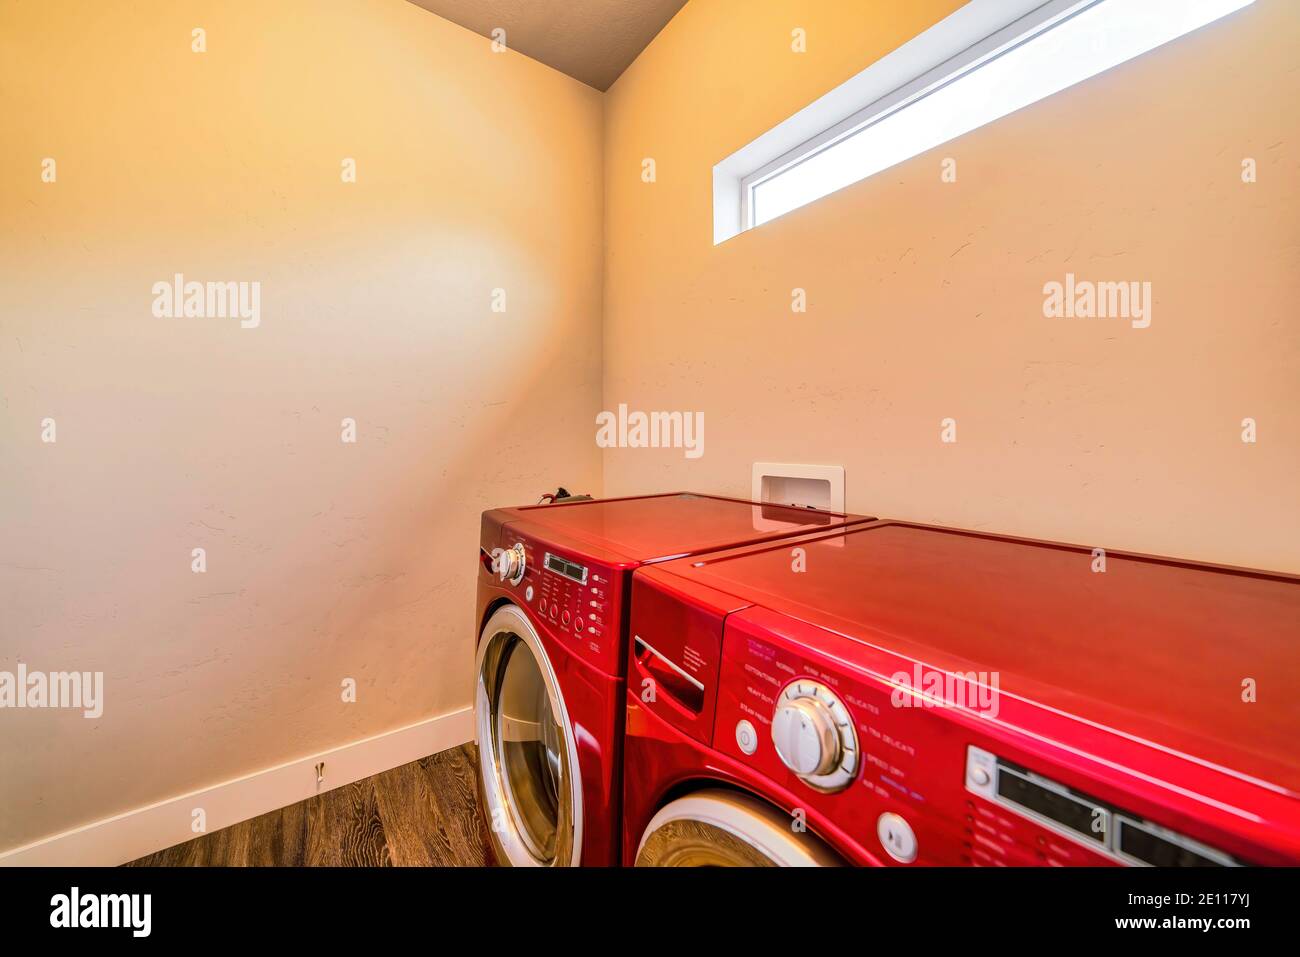 Bright red washing machine and clothes dryer inside the laundry room of home Stock Photo